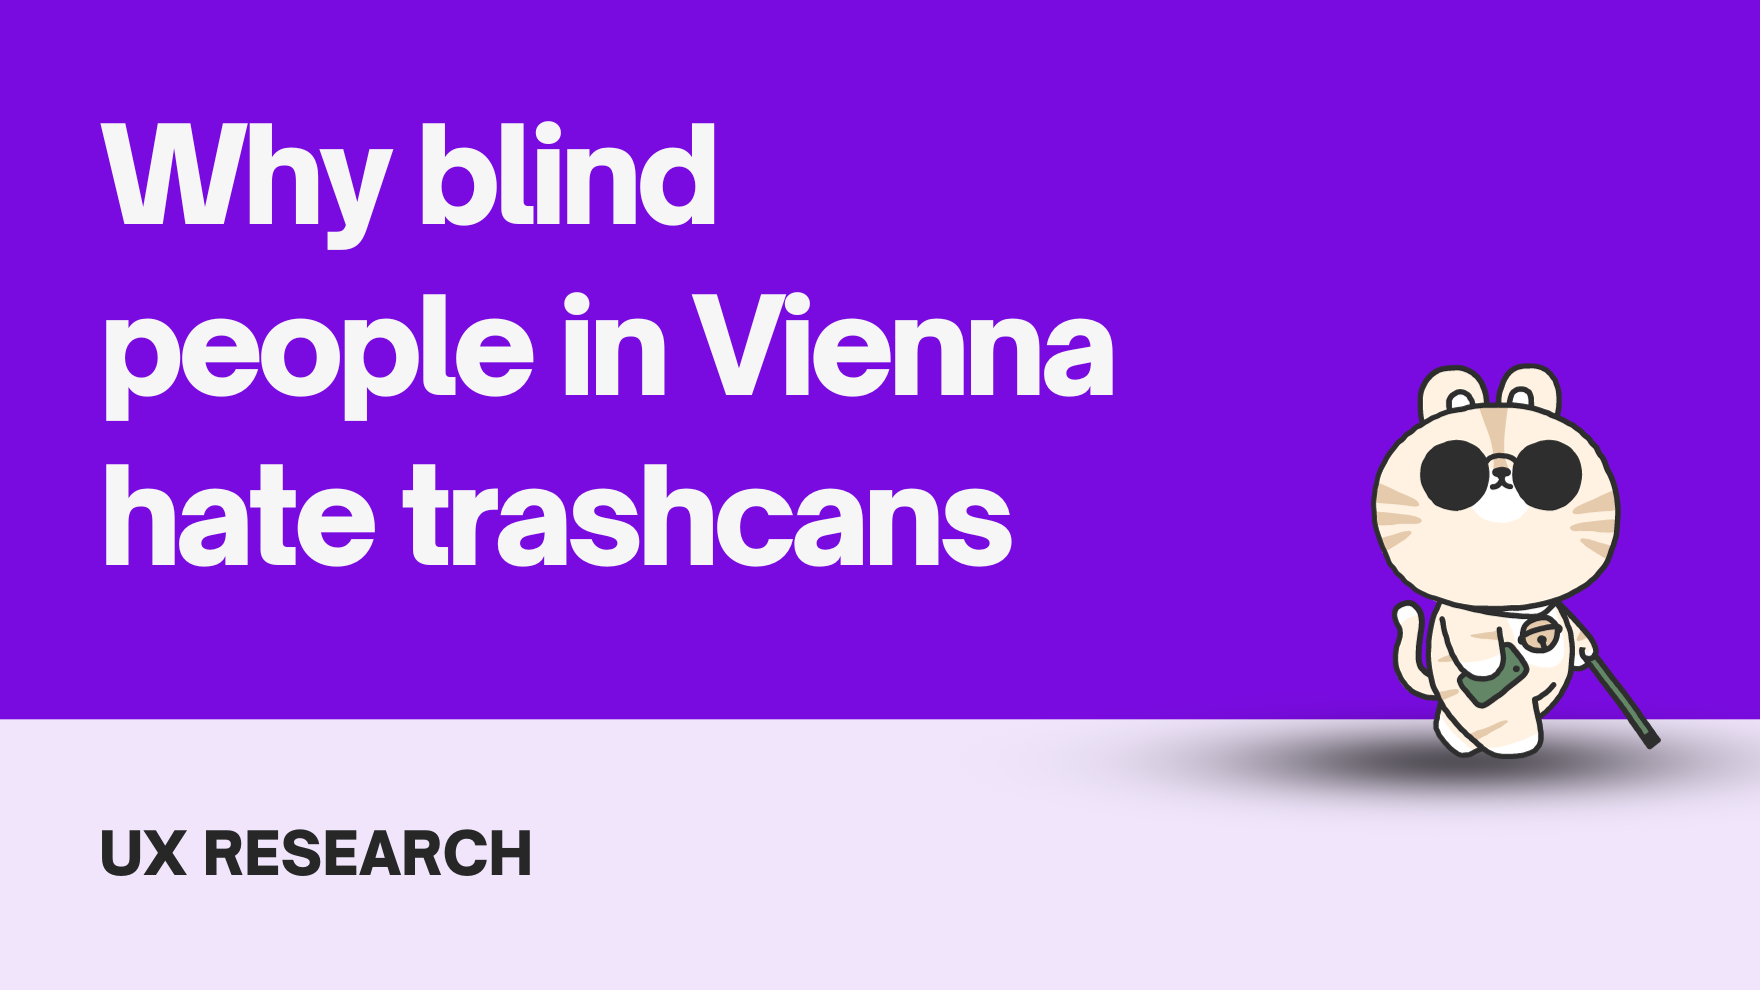 Why blind people in Vienna hate trashcans